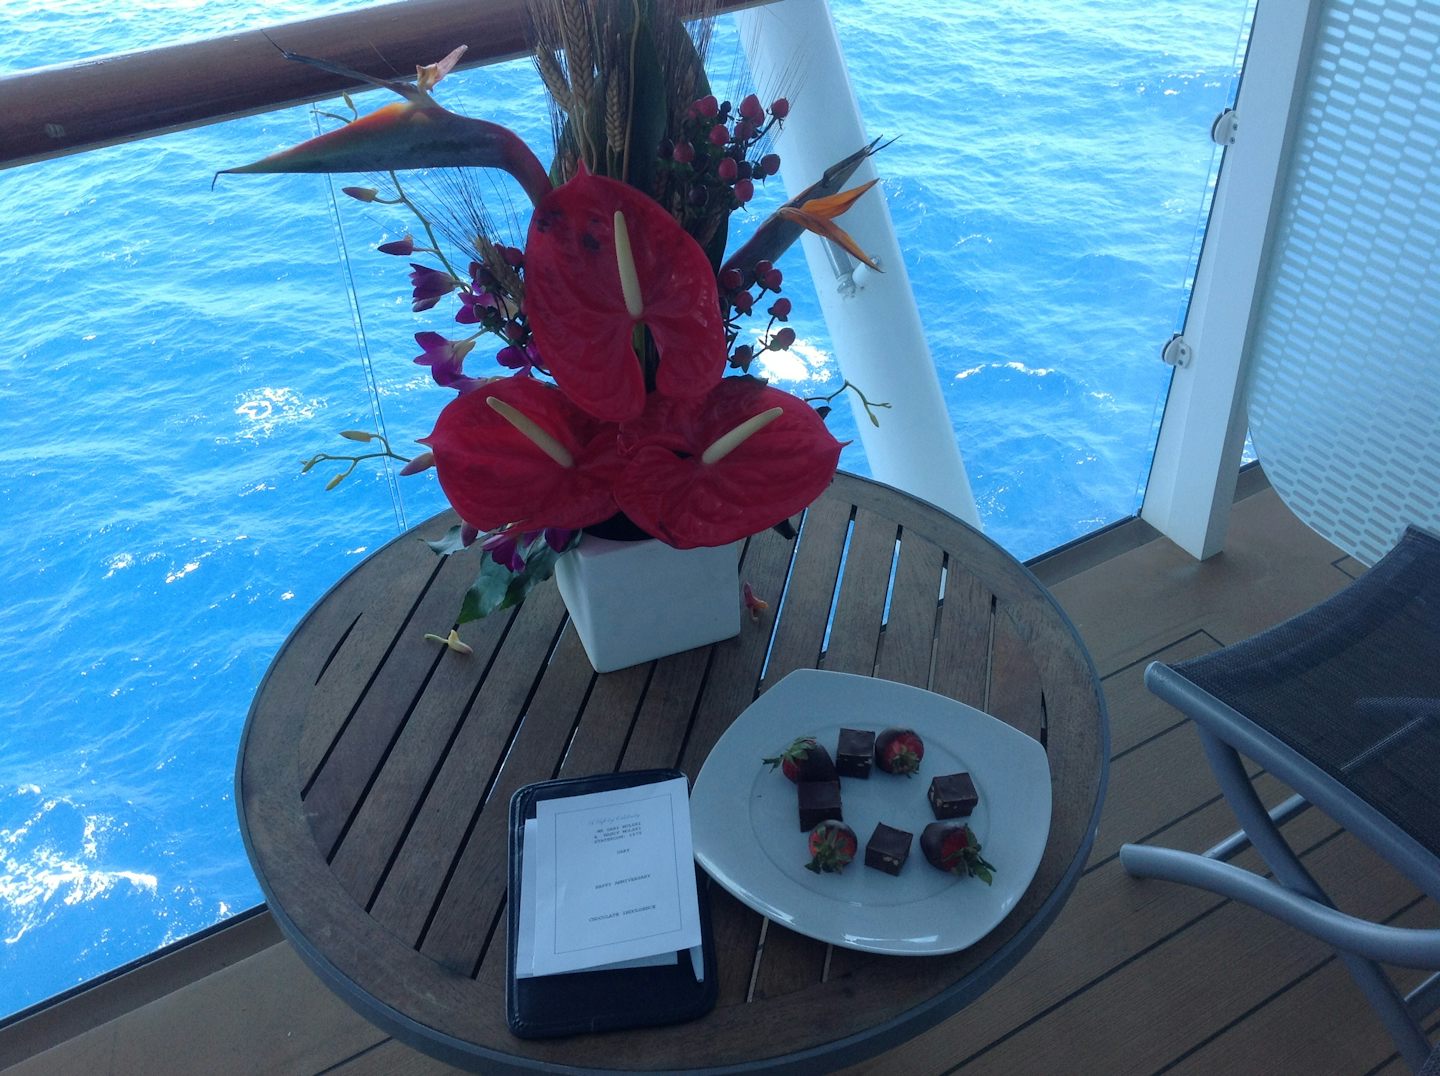 Anniversary flower arrangement arrived at room day of sailing with truffles